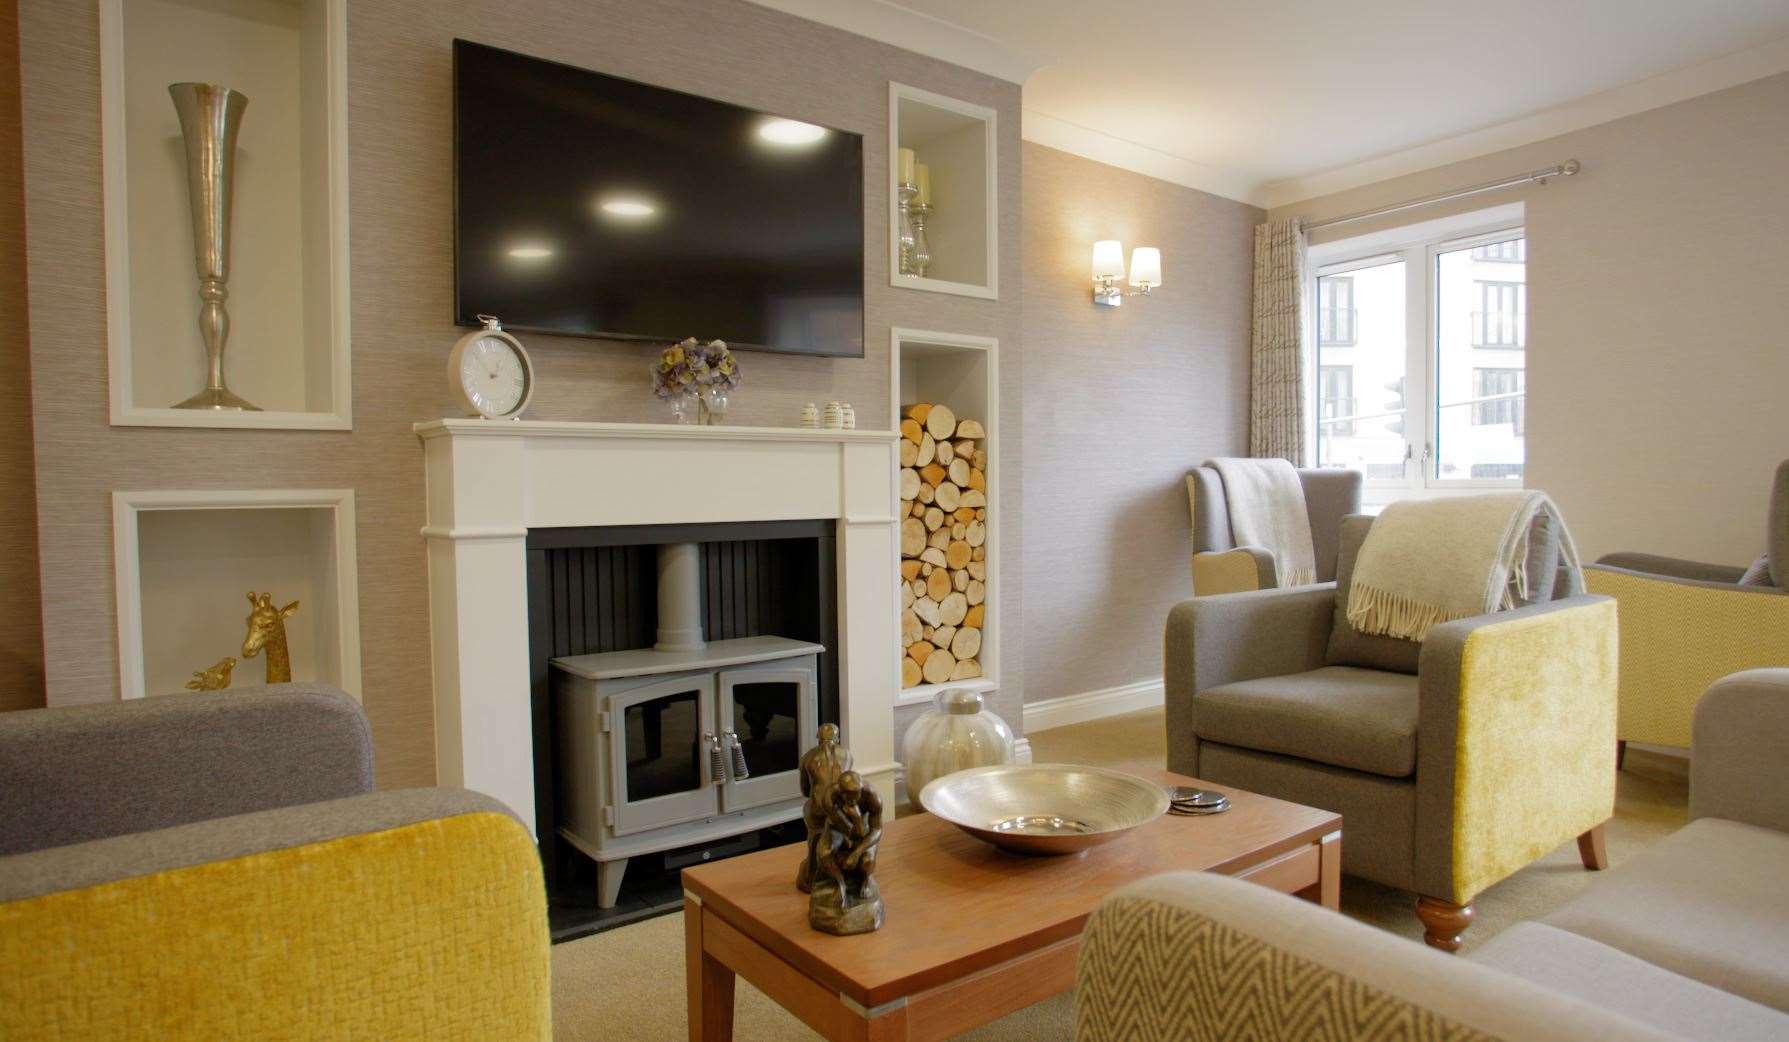 The stunning new care home in Constance Grove, Dartford